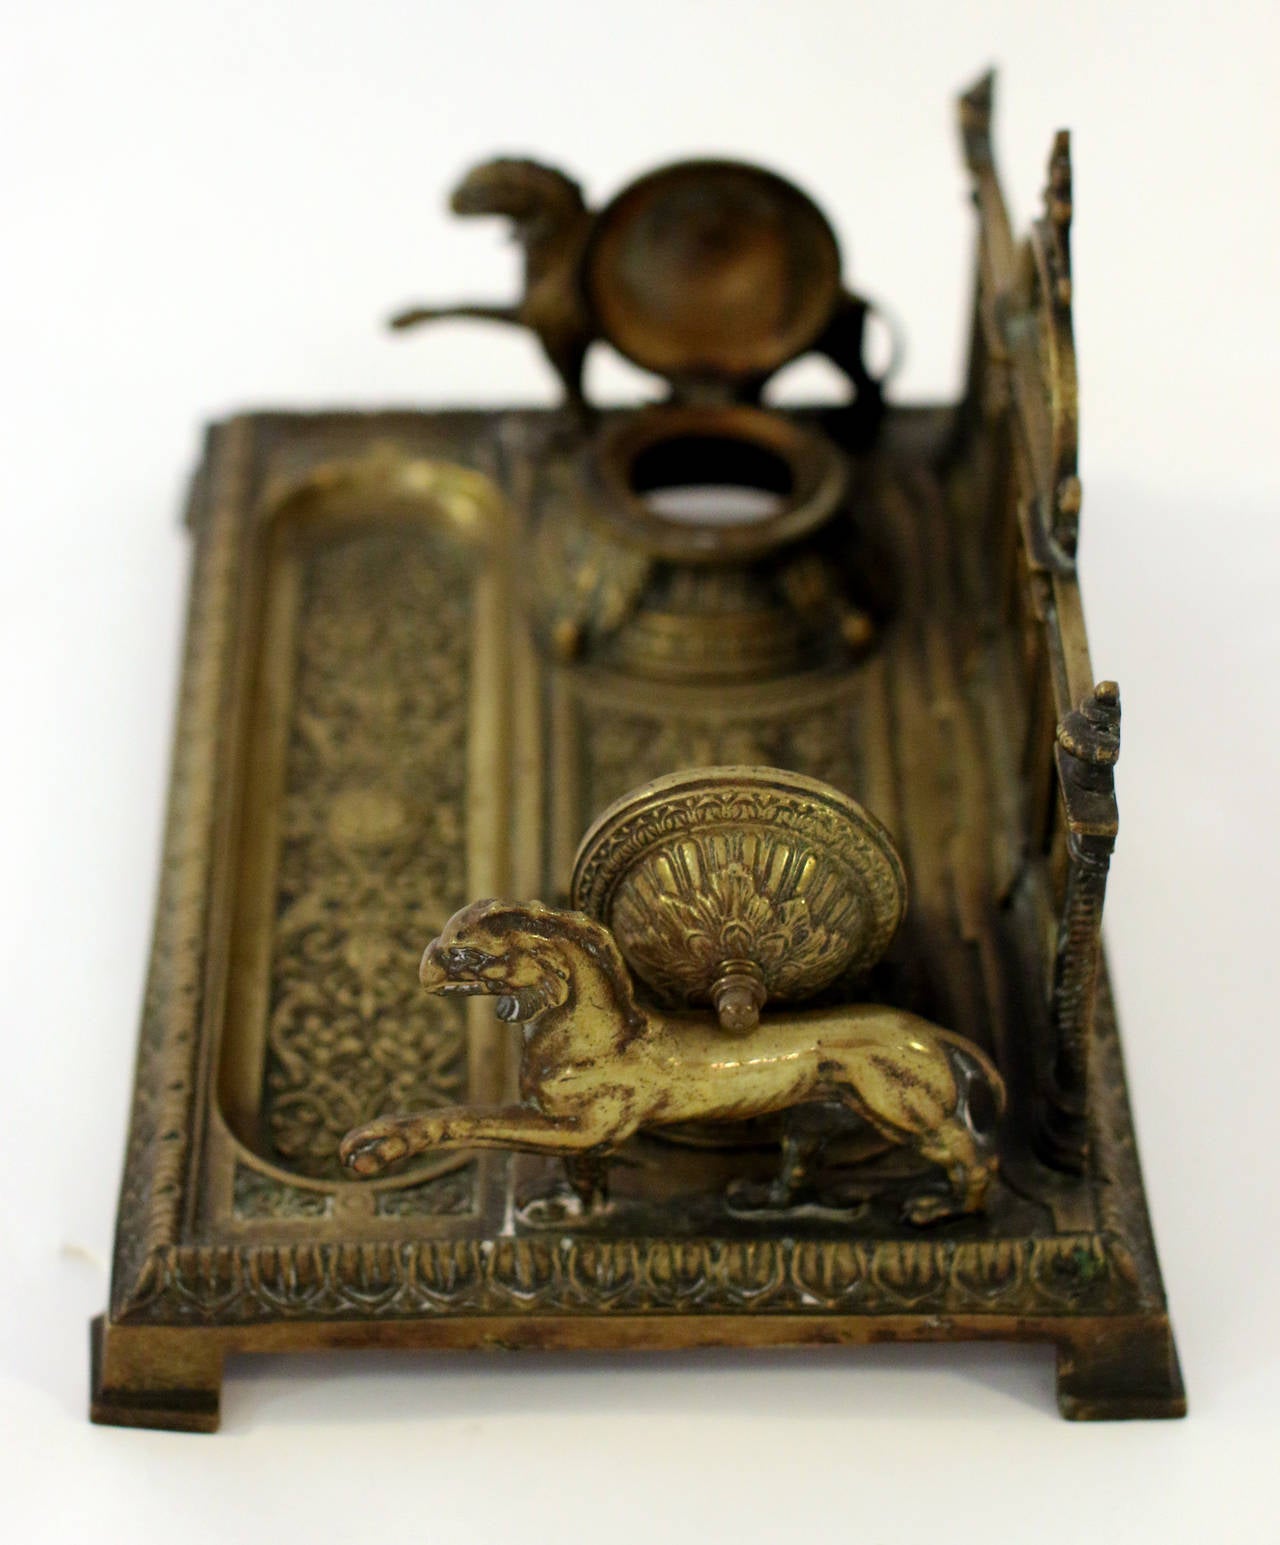 Very ornate and substantial 19th French bronze footed inkwell in the neoclassical style. Features include two lions on either side, Medusa's face between the two lidded wells, and a floral design on the pen tray. An arched center back with a laurel